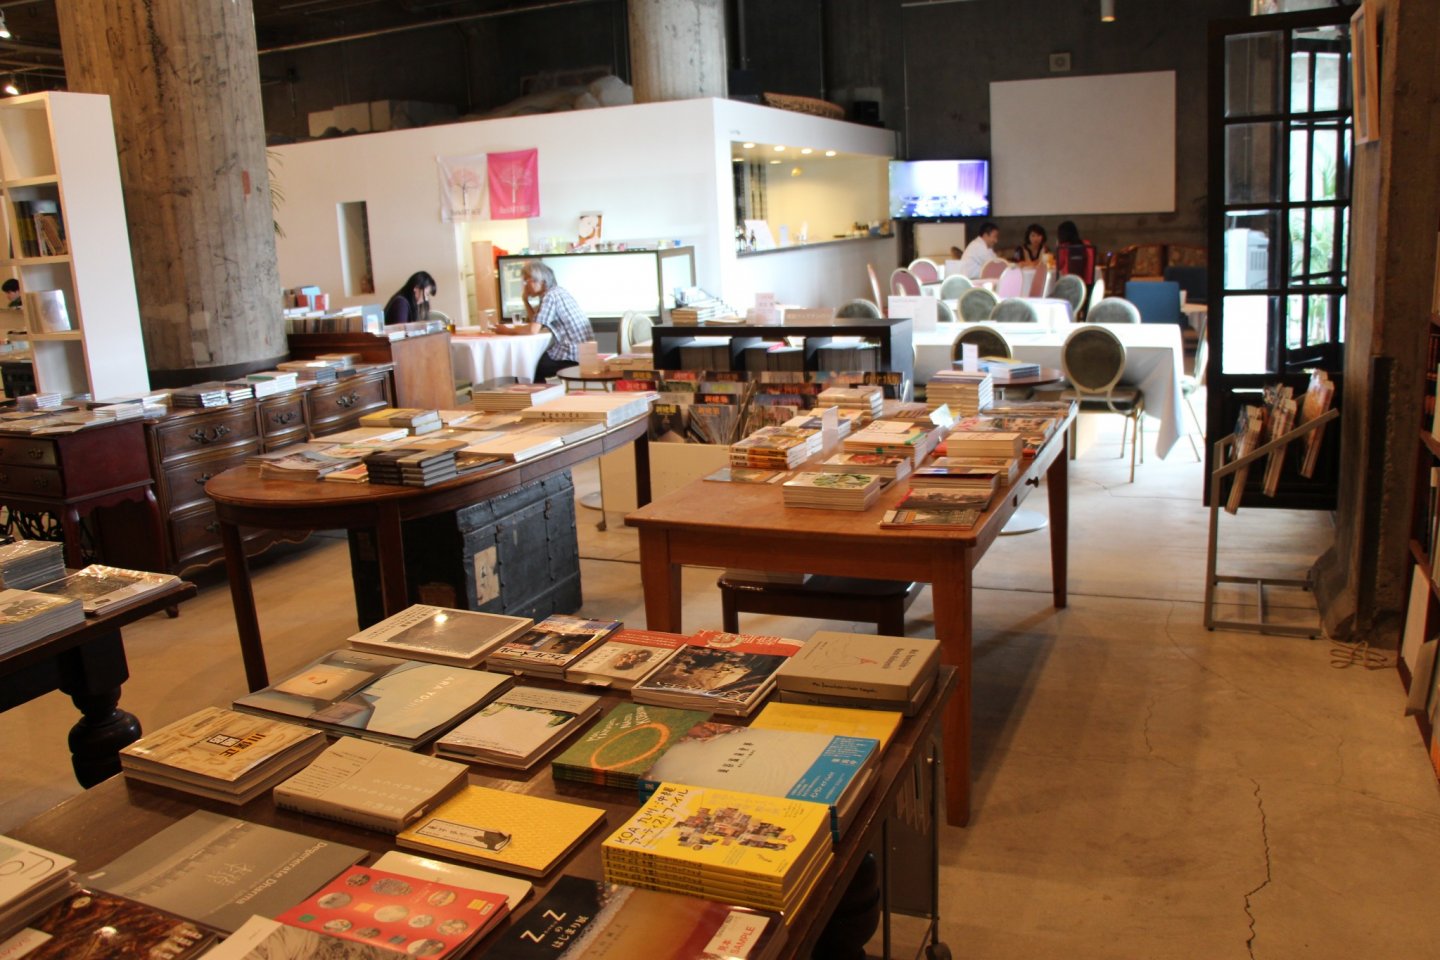 The book shop and the café of the Bankart NY are good places to take a break